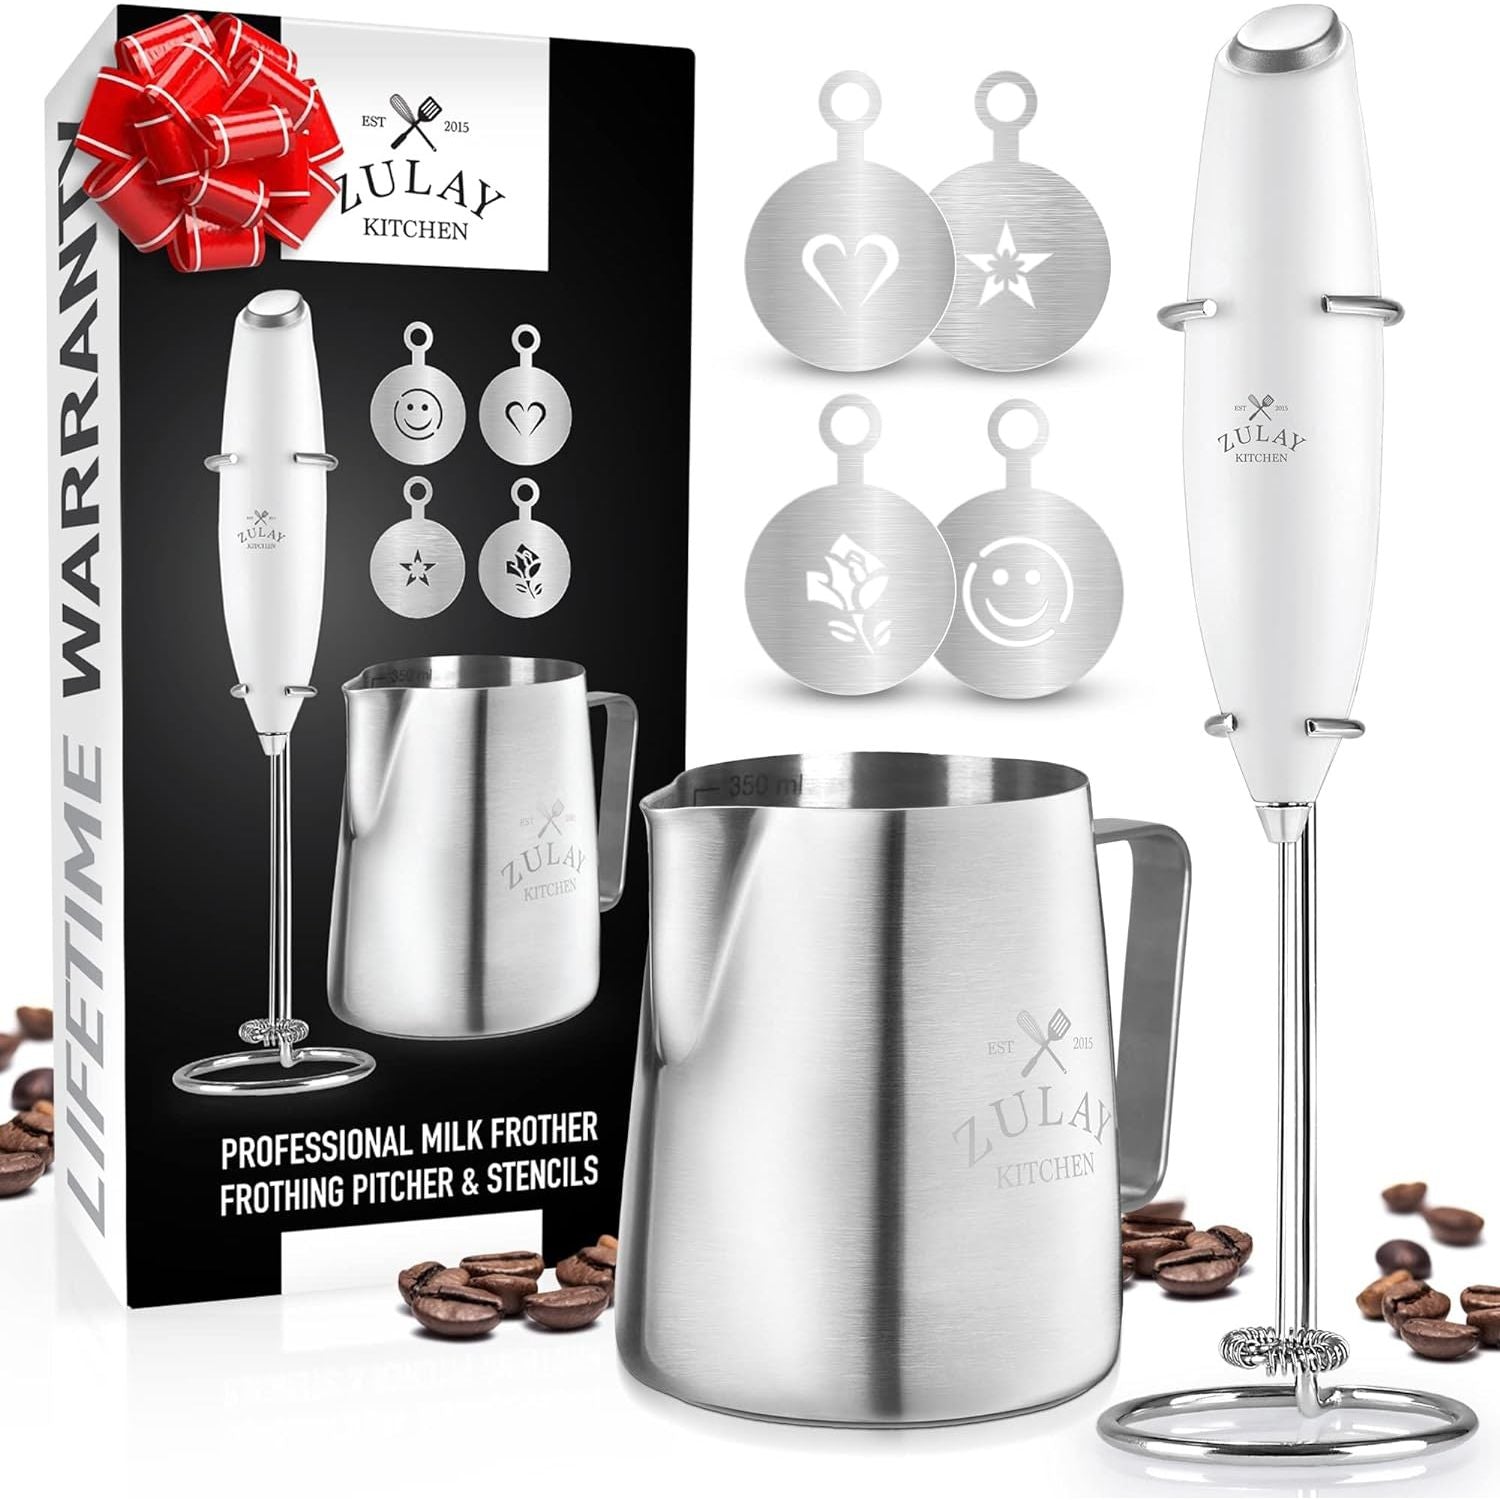 Zulay Kitchen ZK Milk Frother Heater Set - Silver - 233 requests